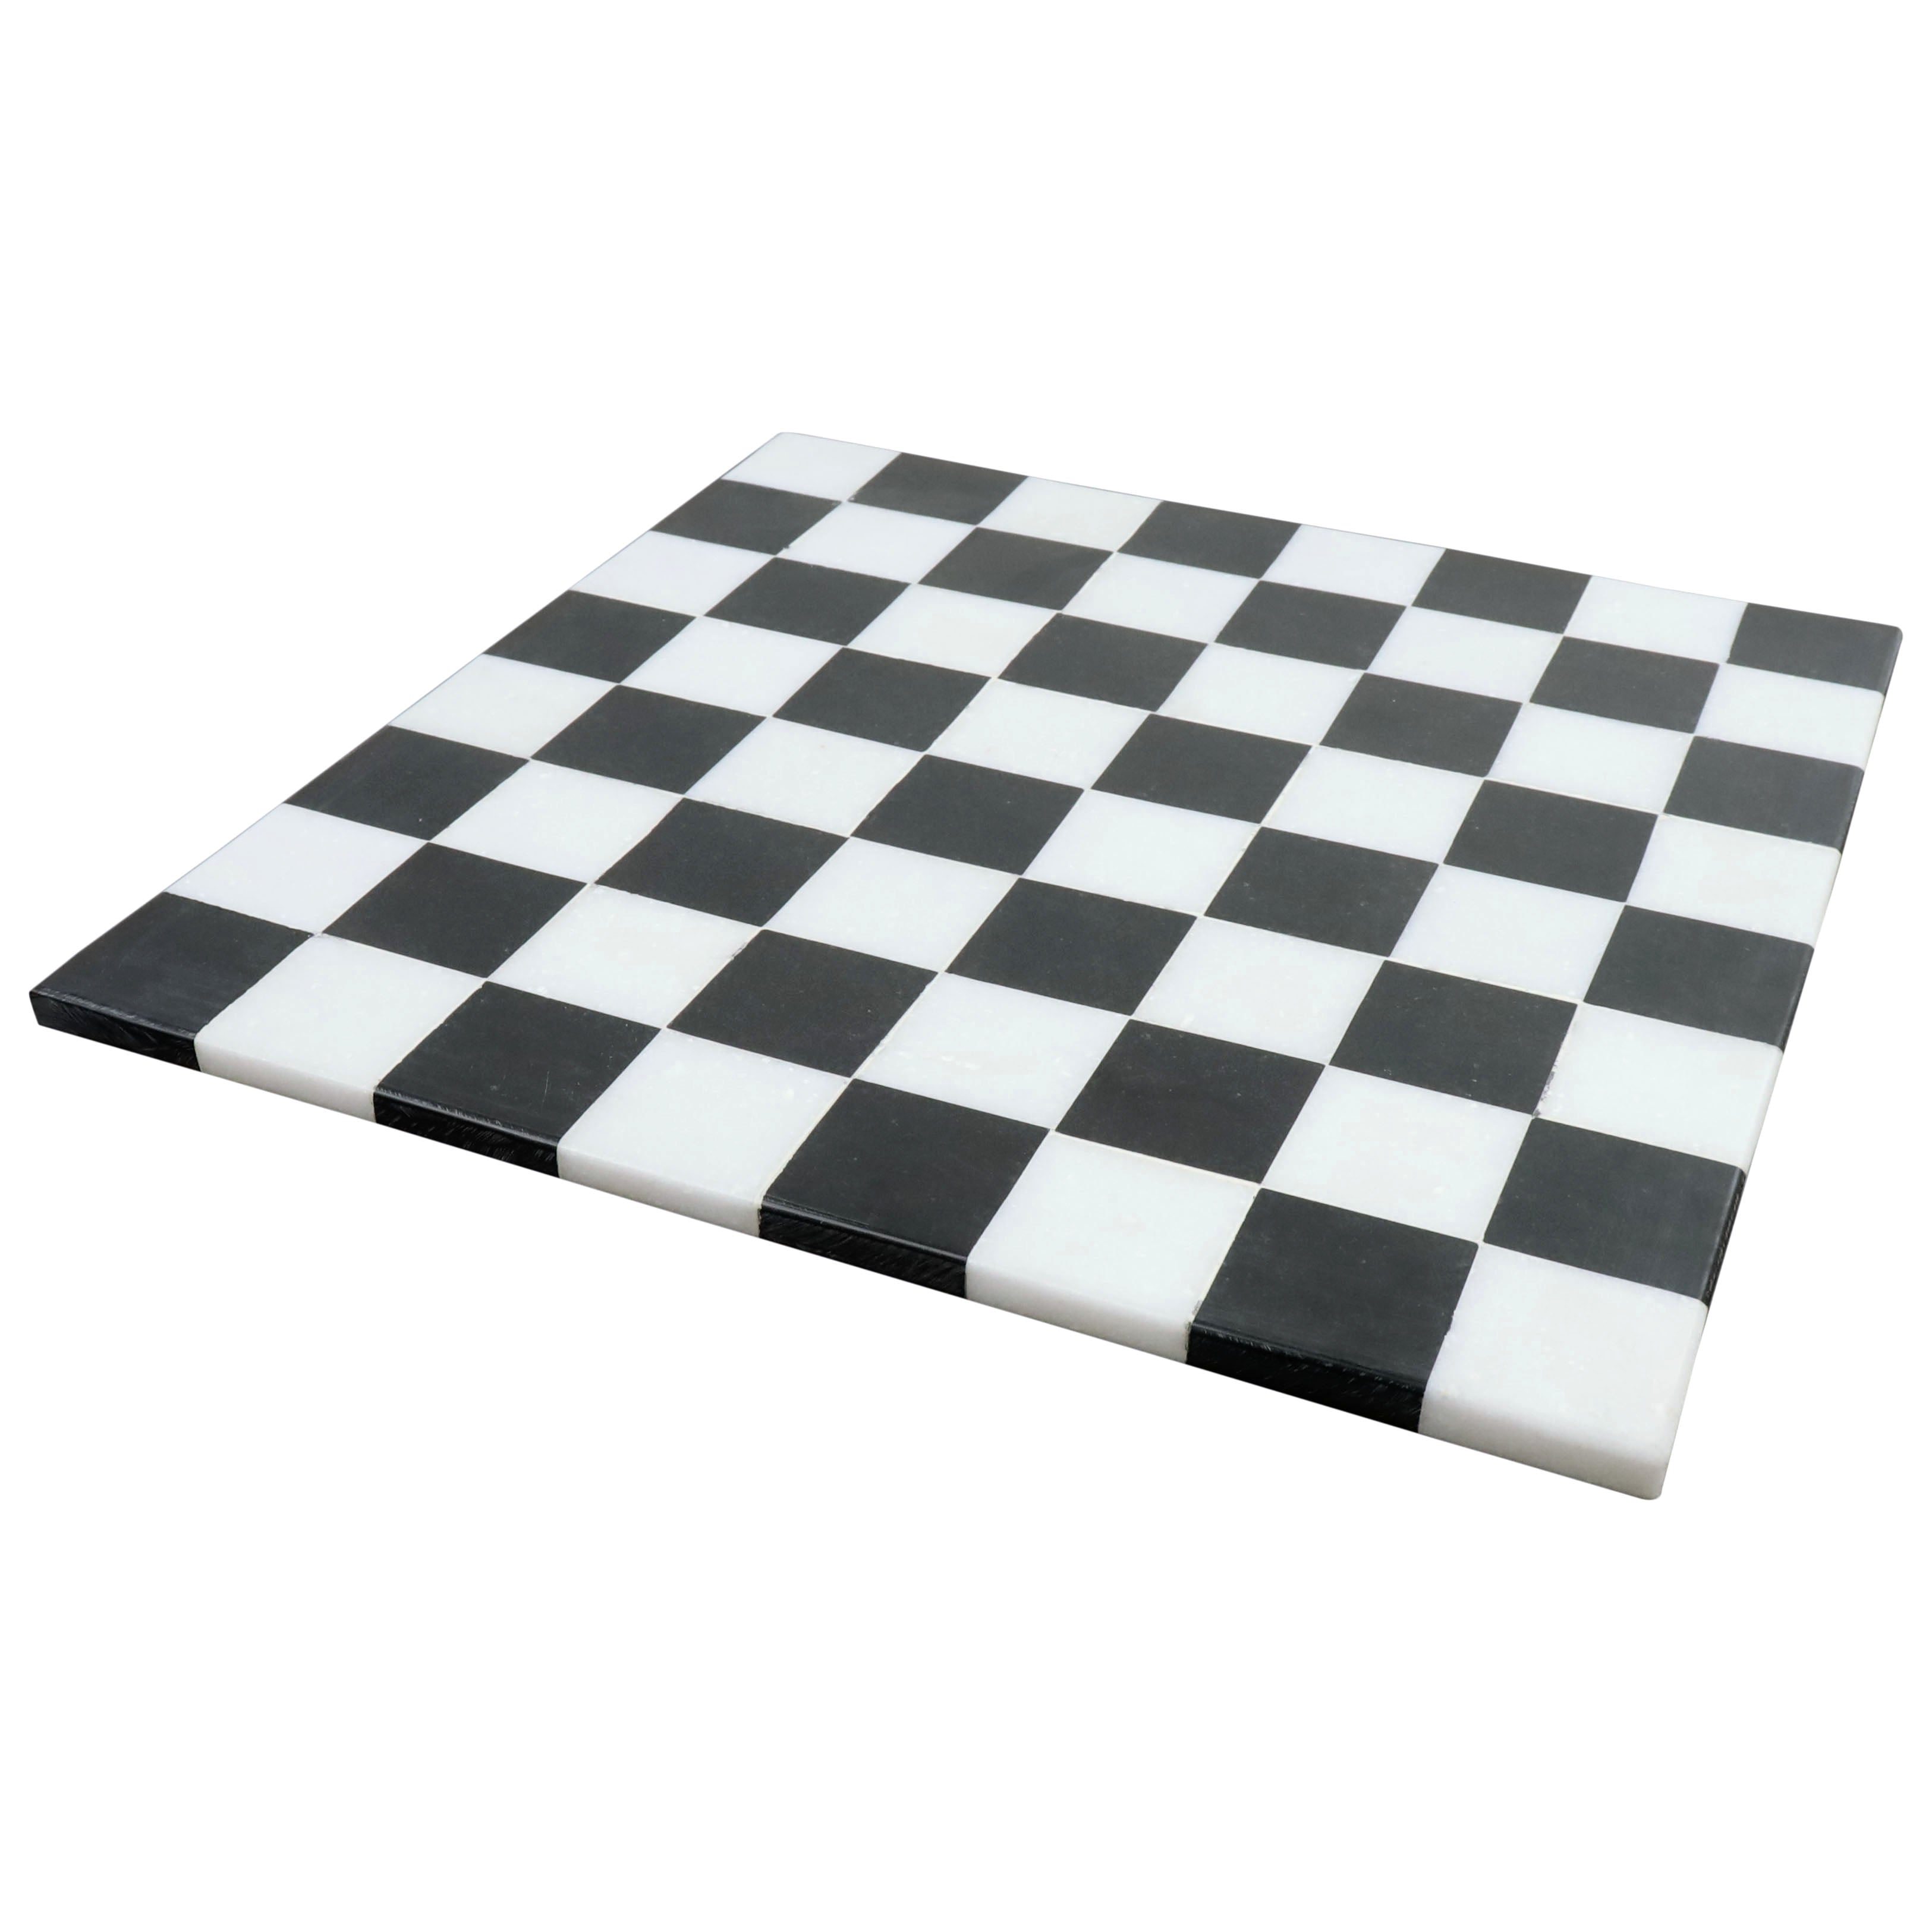 15'' Borderless Solid Black and White Marble Luxury Chess Board